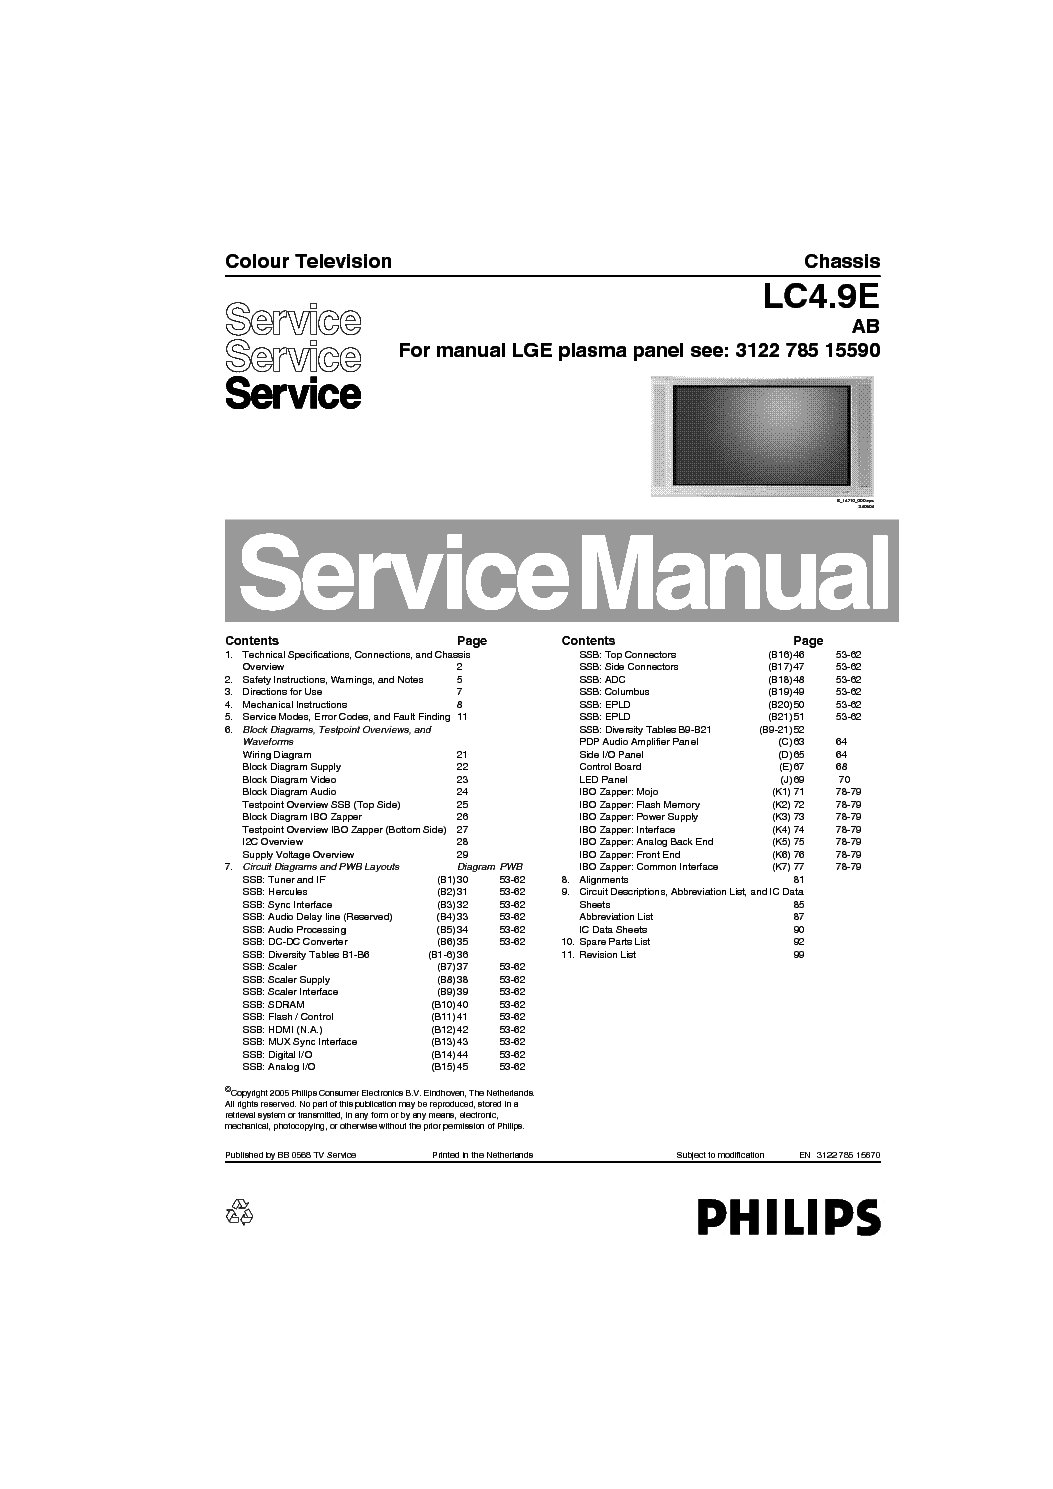 PHILIPS CHASSIS LC4.9E-AB SM service manual (1st page)